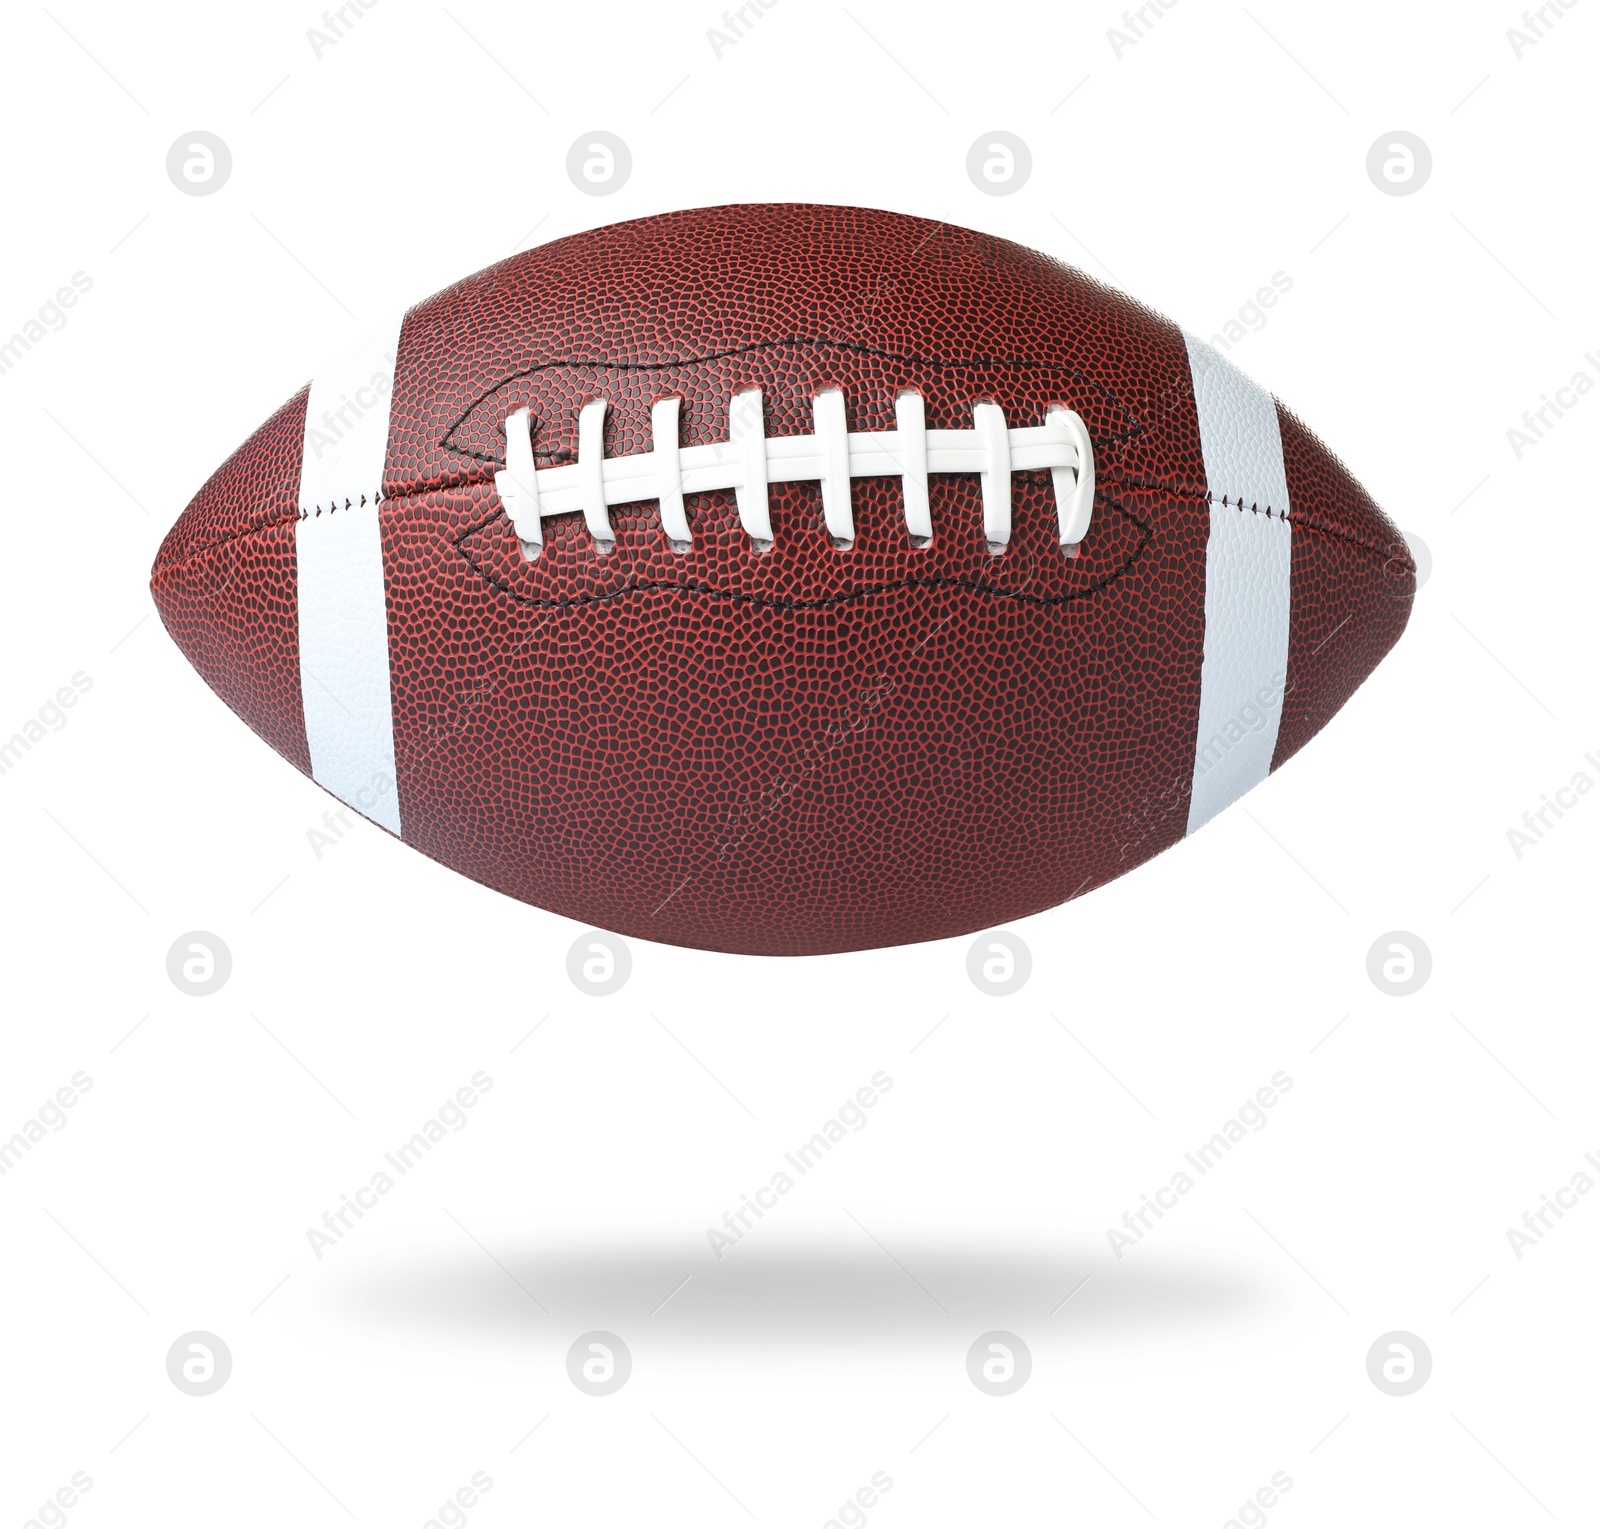 Image of Leather American football ball on white background